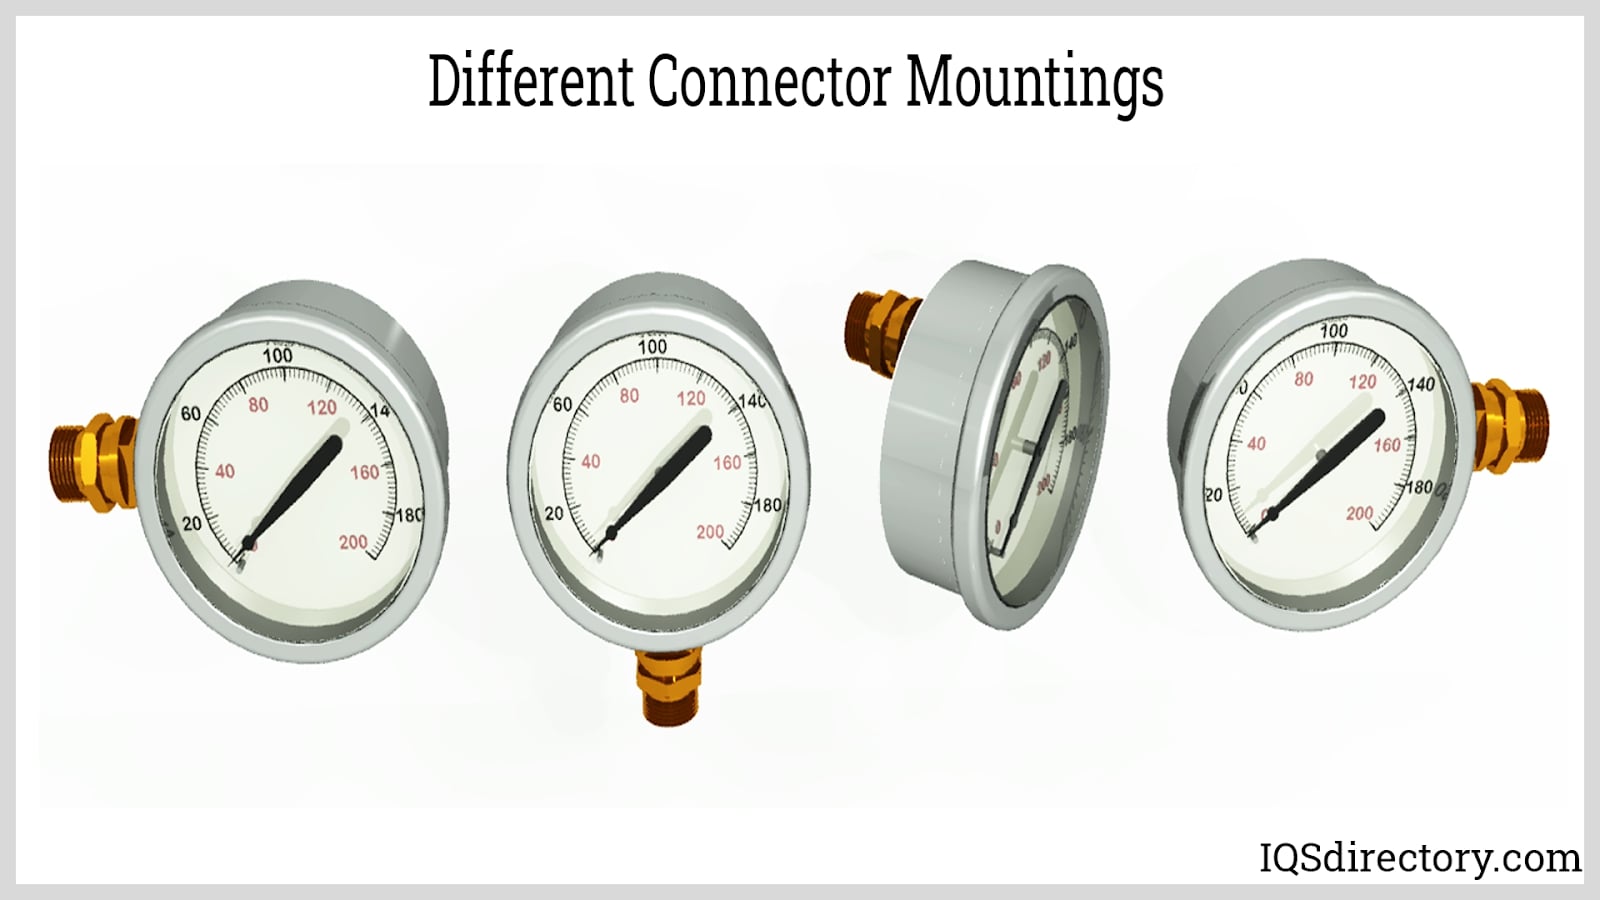 https://www.iqsdirectory.com/articles/pressure-gauge/different-connector-mountings.jpg